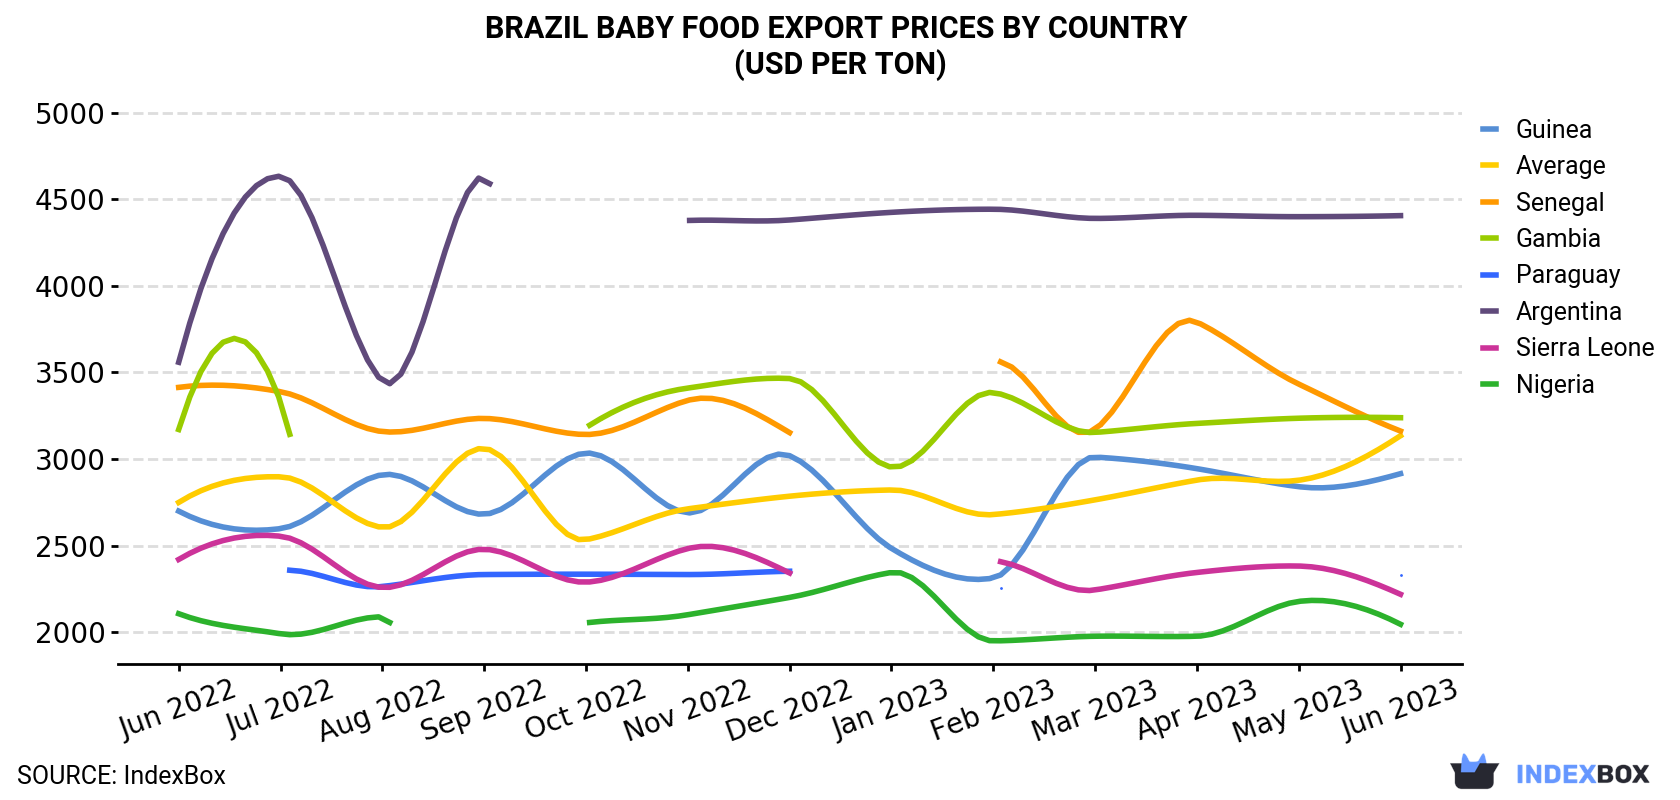 Brazil Baby Food Export Prices By Country (USD Per Ton)